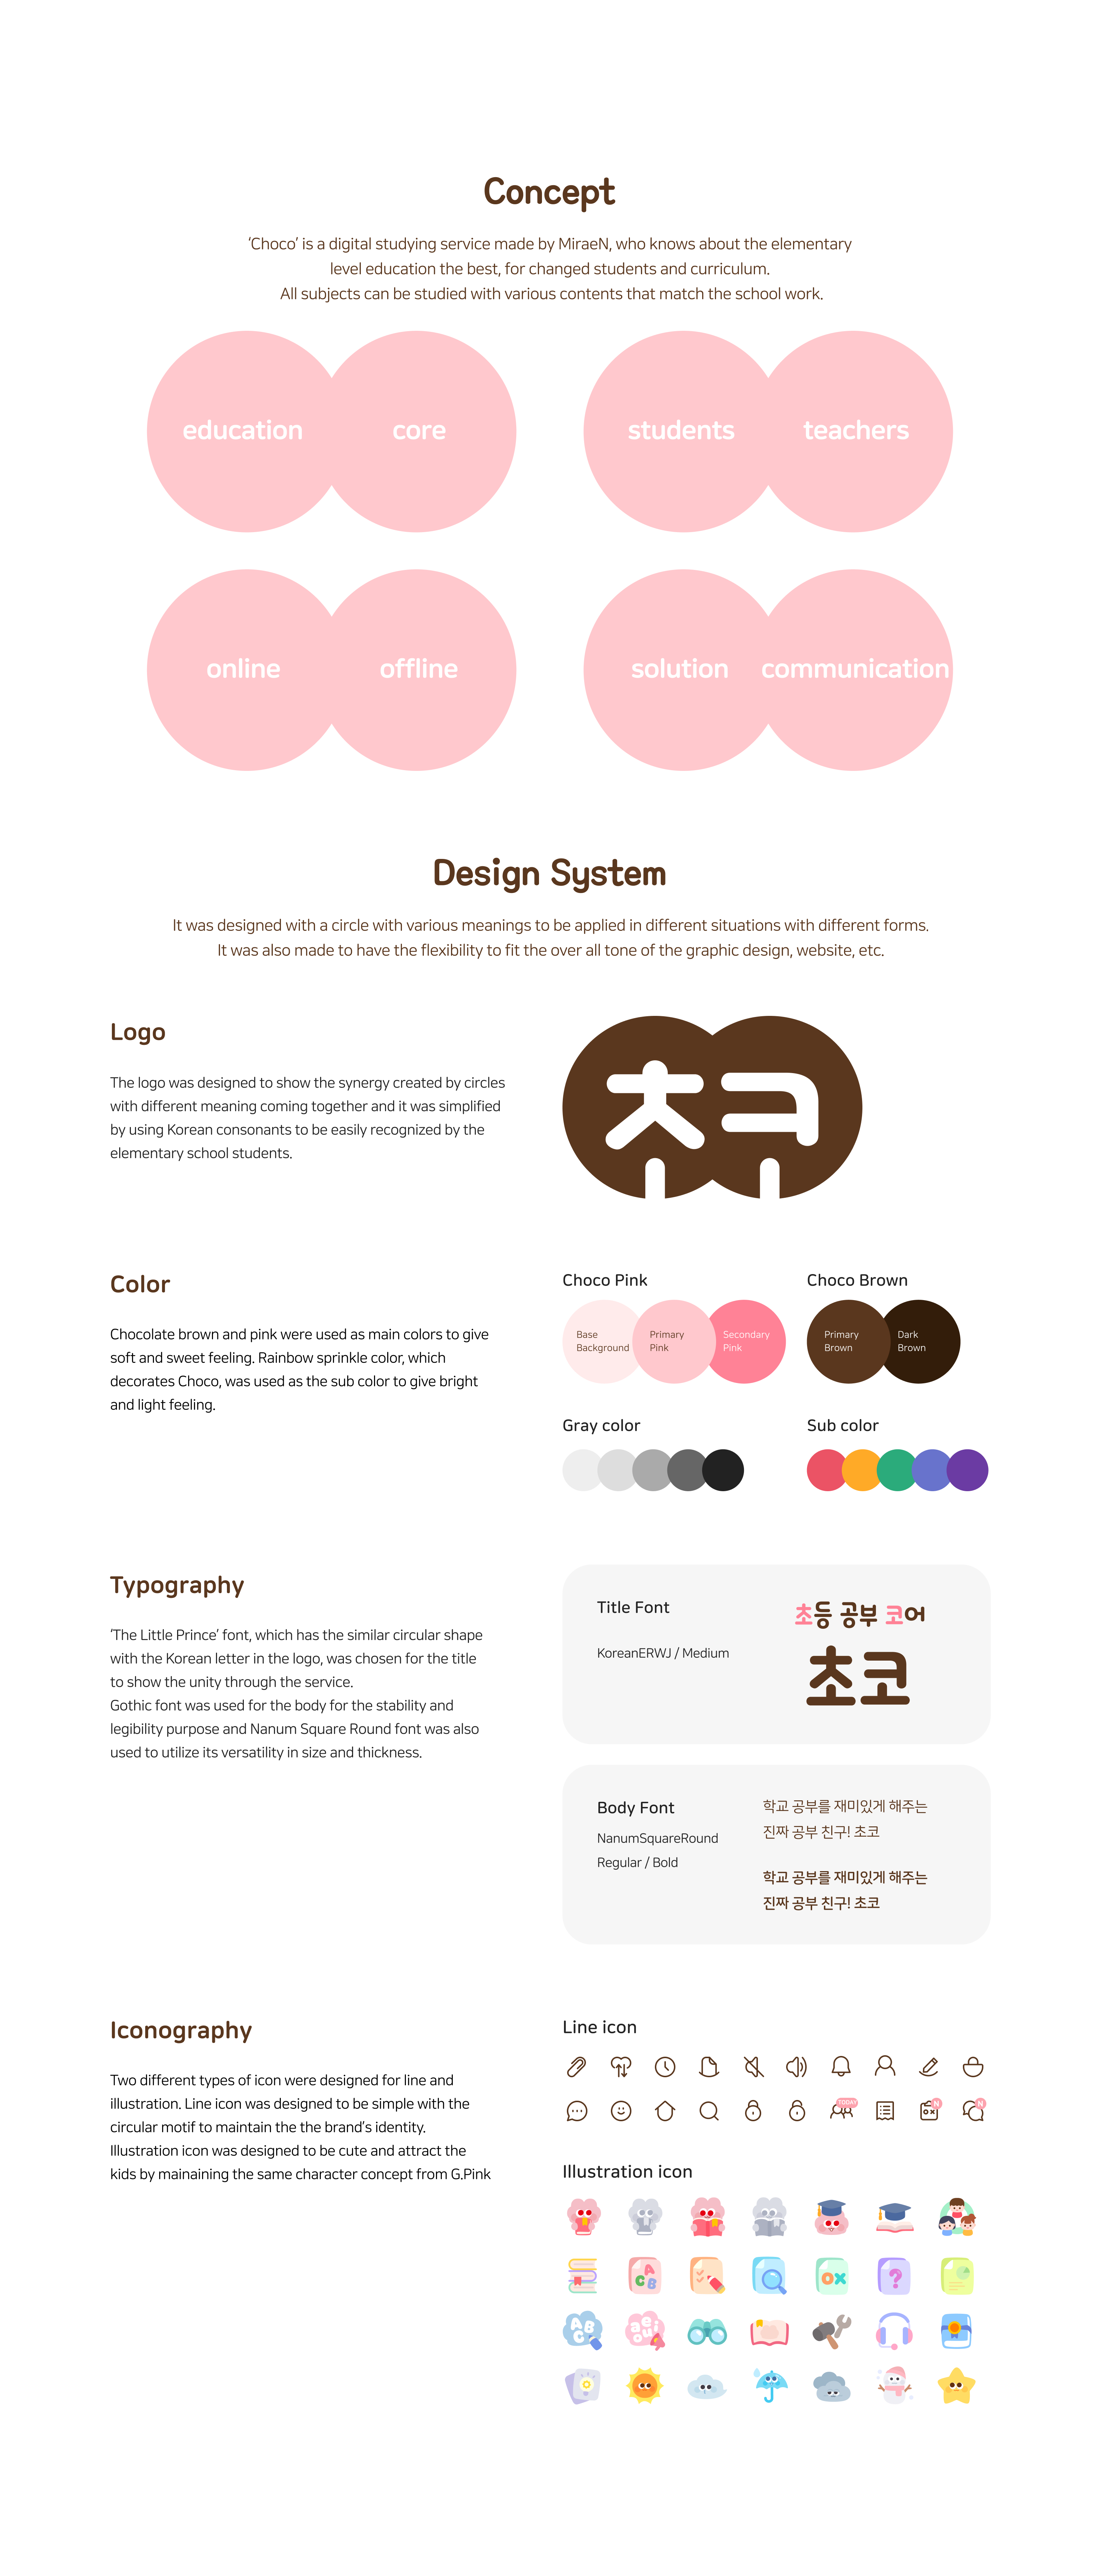 Concept and Design System